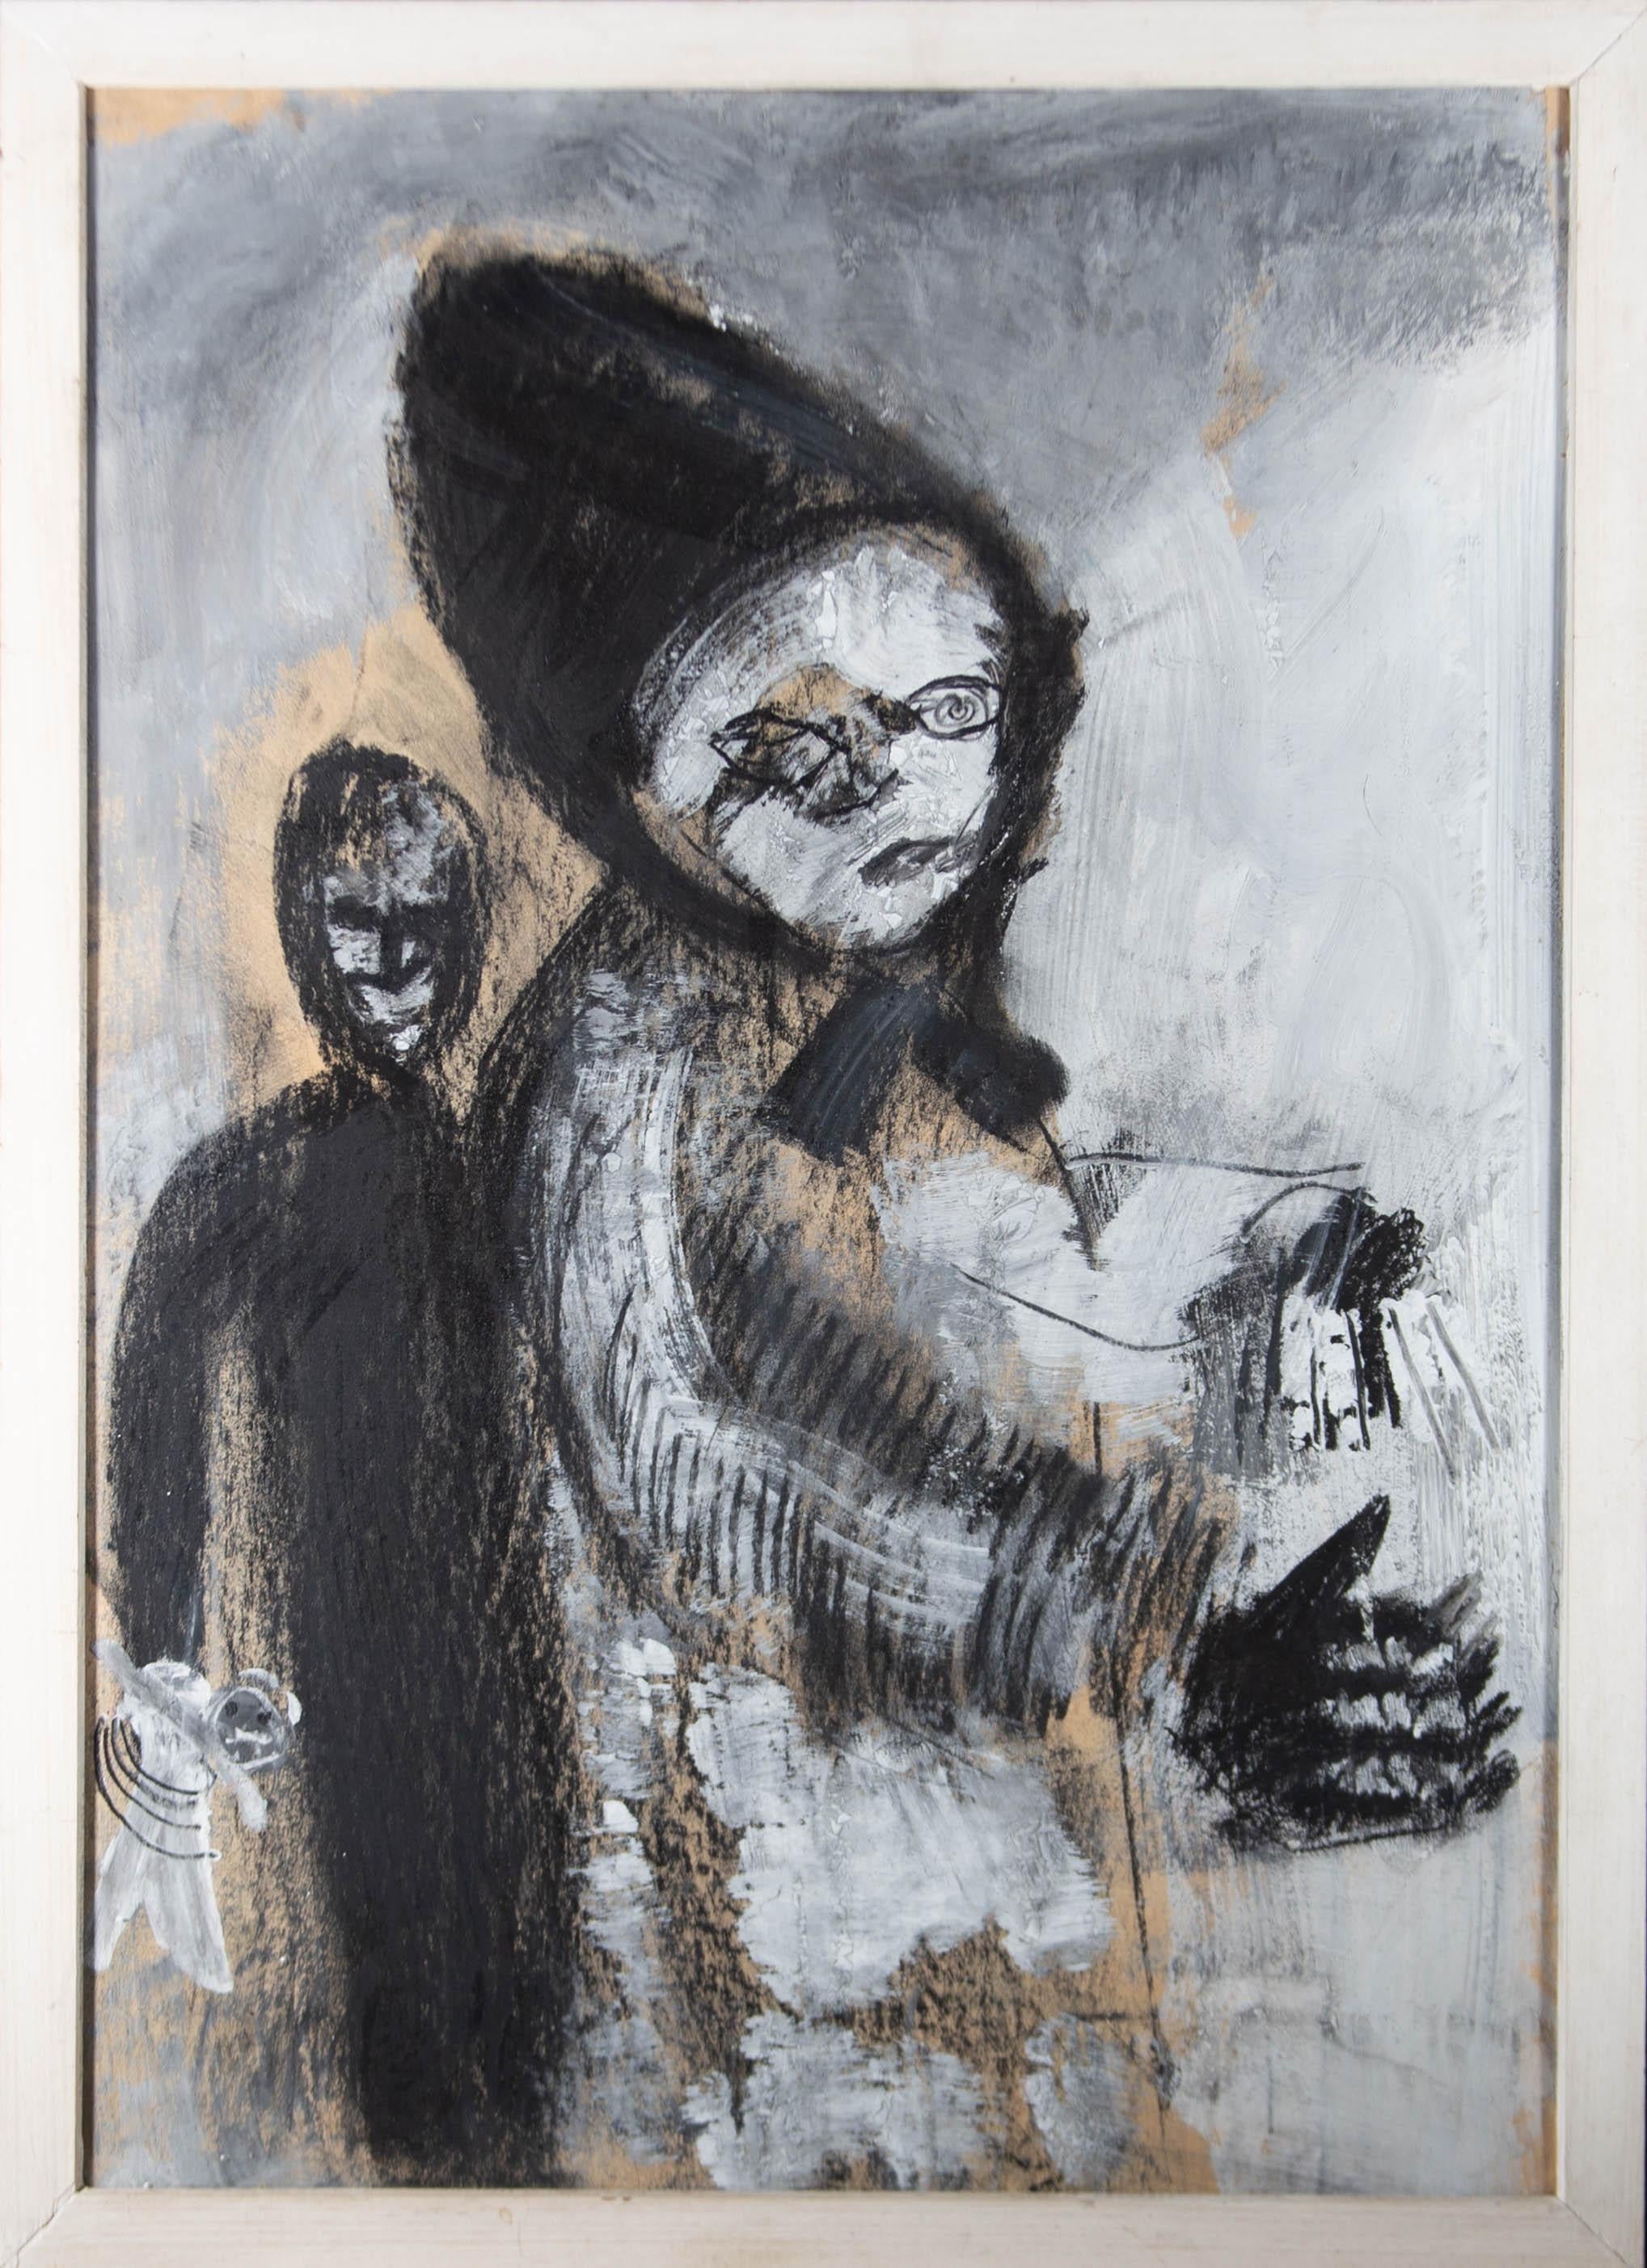 A haunting mixed media drawing in charcoal, oil and chalk. The striking image shows a wide eyed woman in a bonnet, holding an object to her chest as a shadowy figure lurks behind her, clutching a half decapitated doll in a claw like hand. The